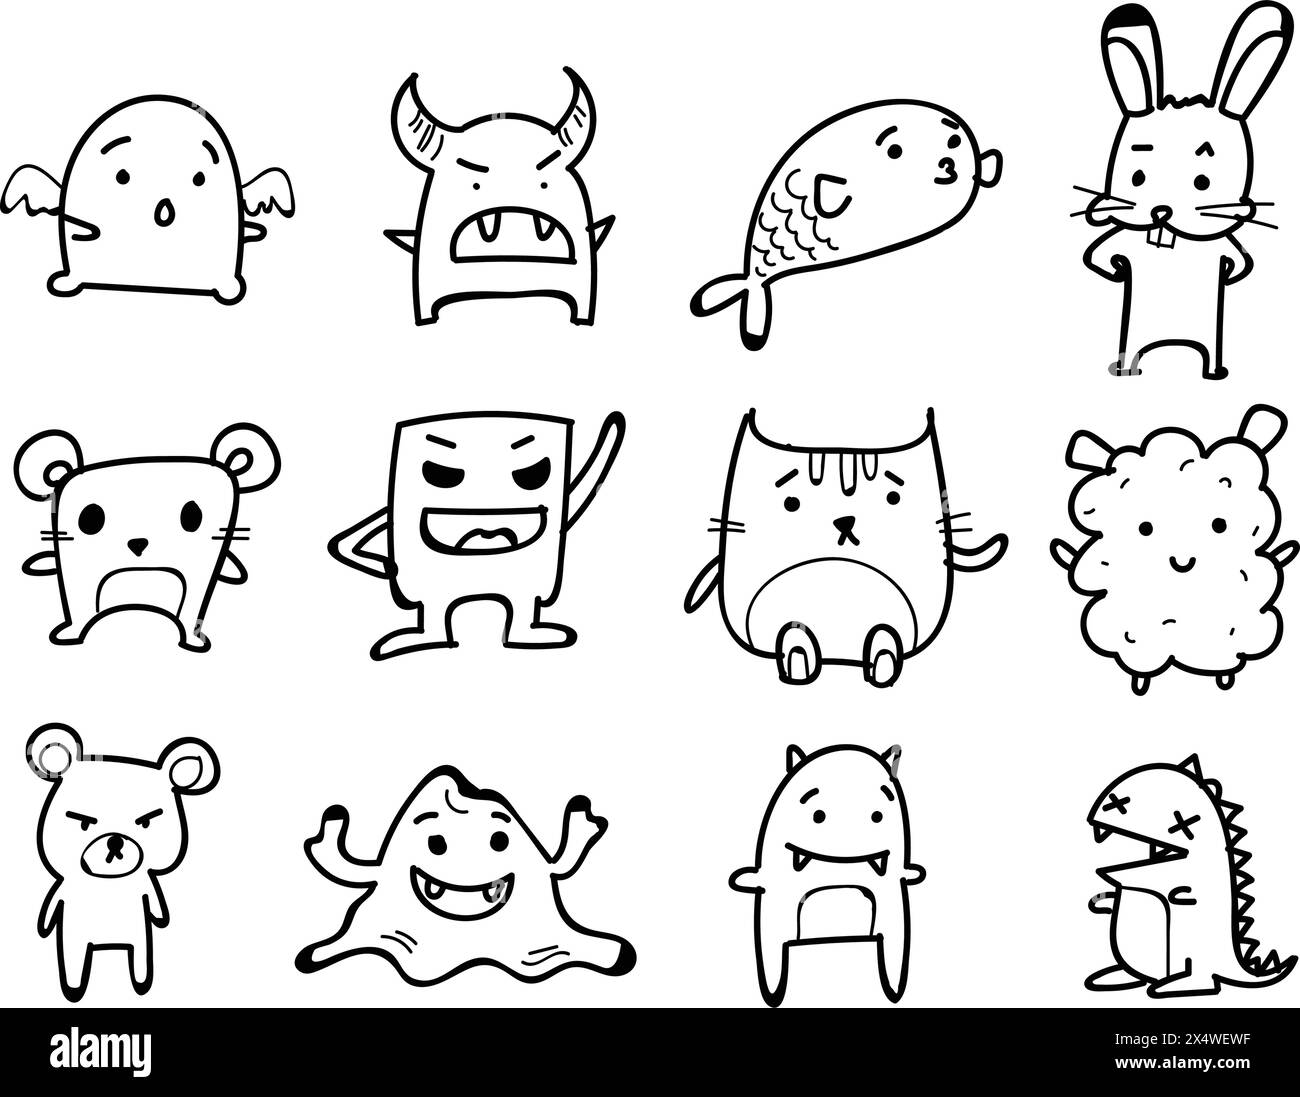 Set of Monsters, Animals. Doodle cartoon drawing on white background Stock Vector